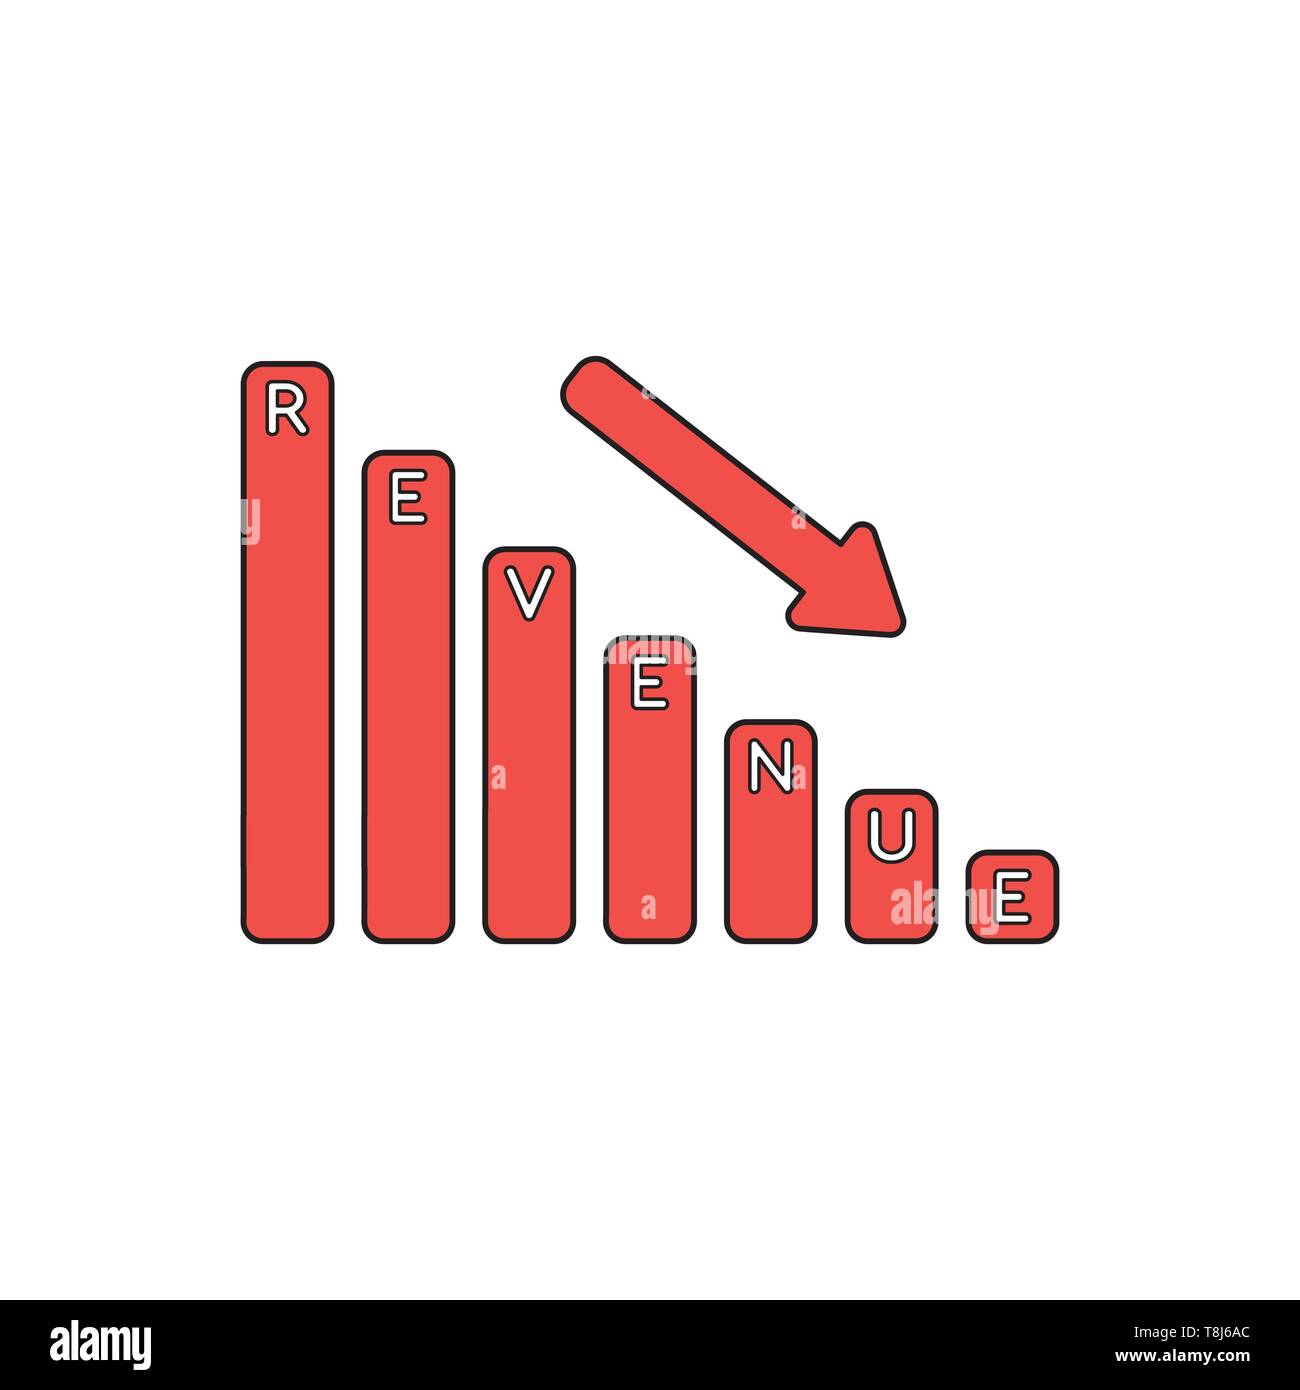 Vector icon concept of revenue sales bar graph moving down. Black outlines and colored. Stock Vector